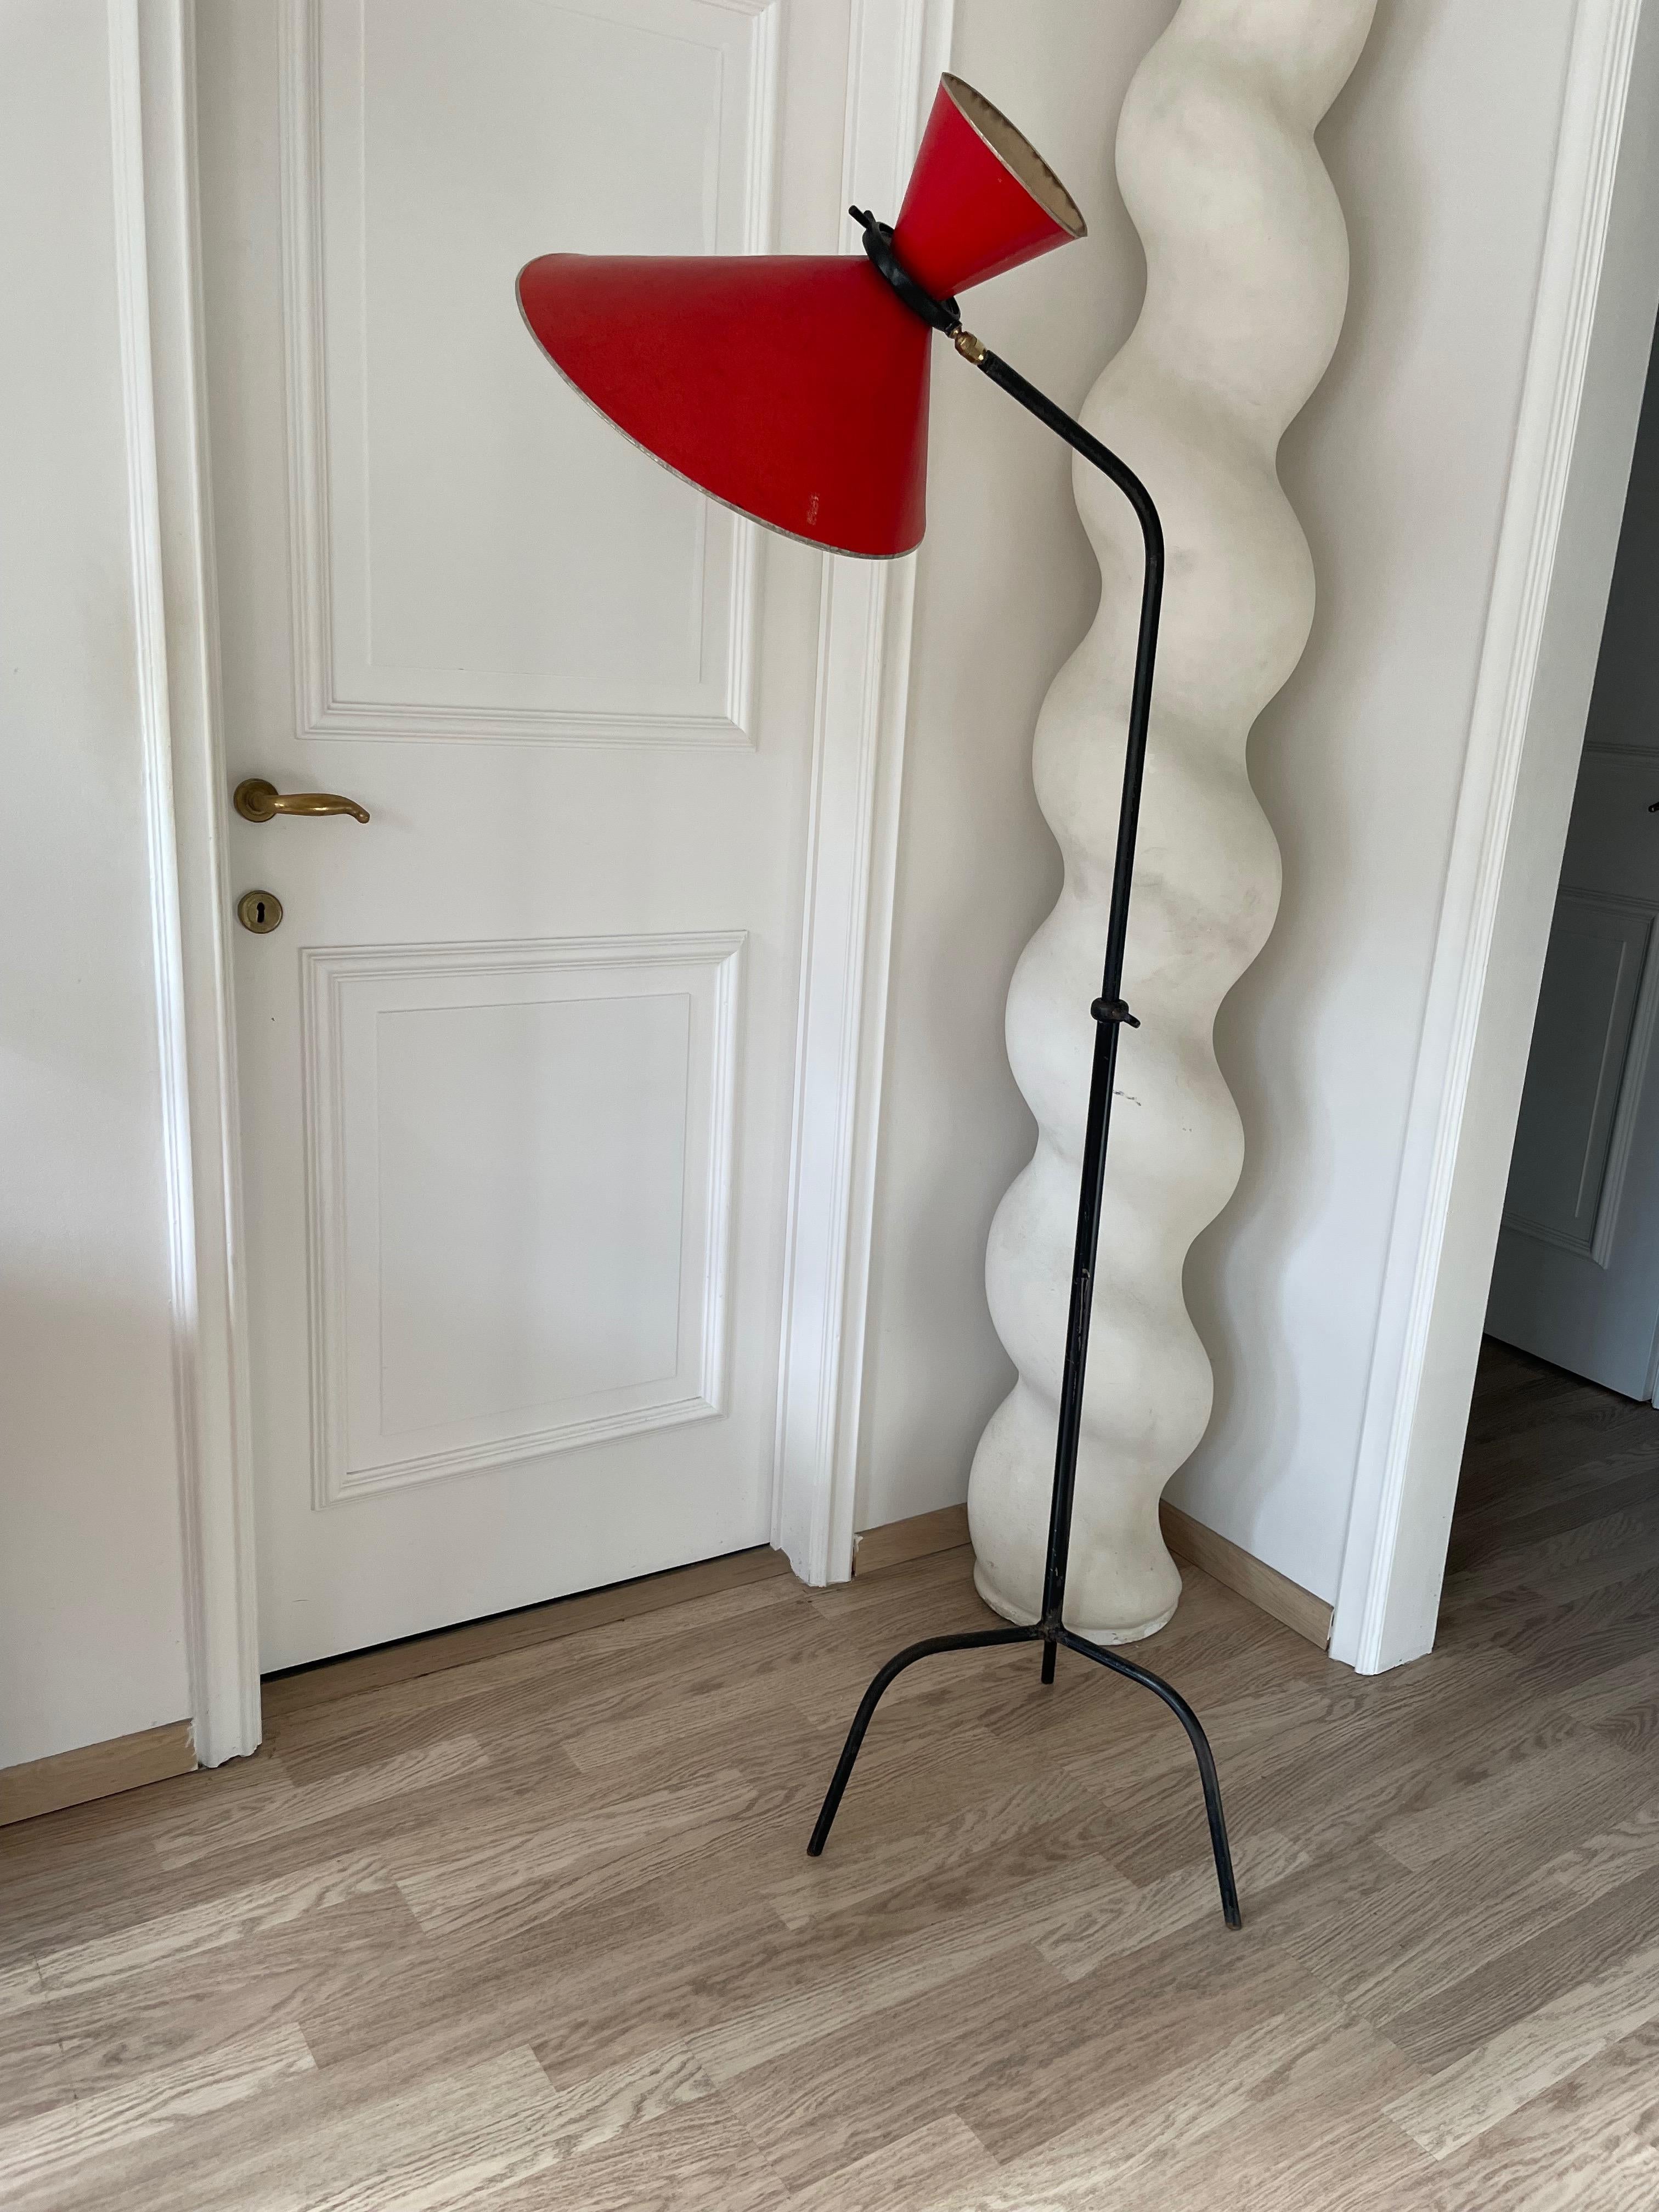 50's Adjustable Floor Lamp With Red Diabolo Shade by Maison Lunel, France 1954. For Sale 1